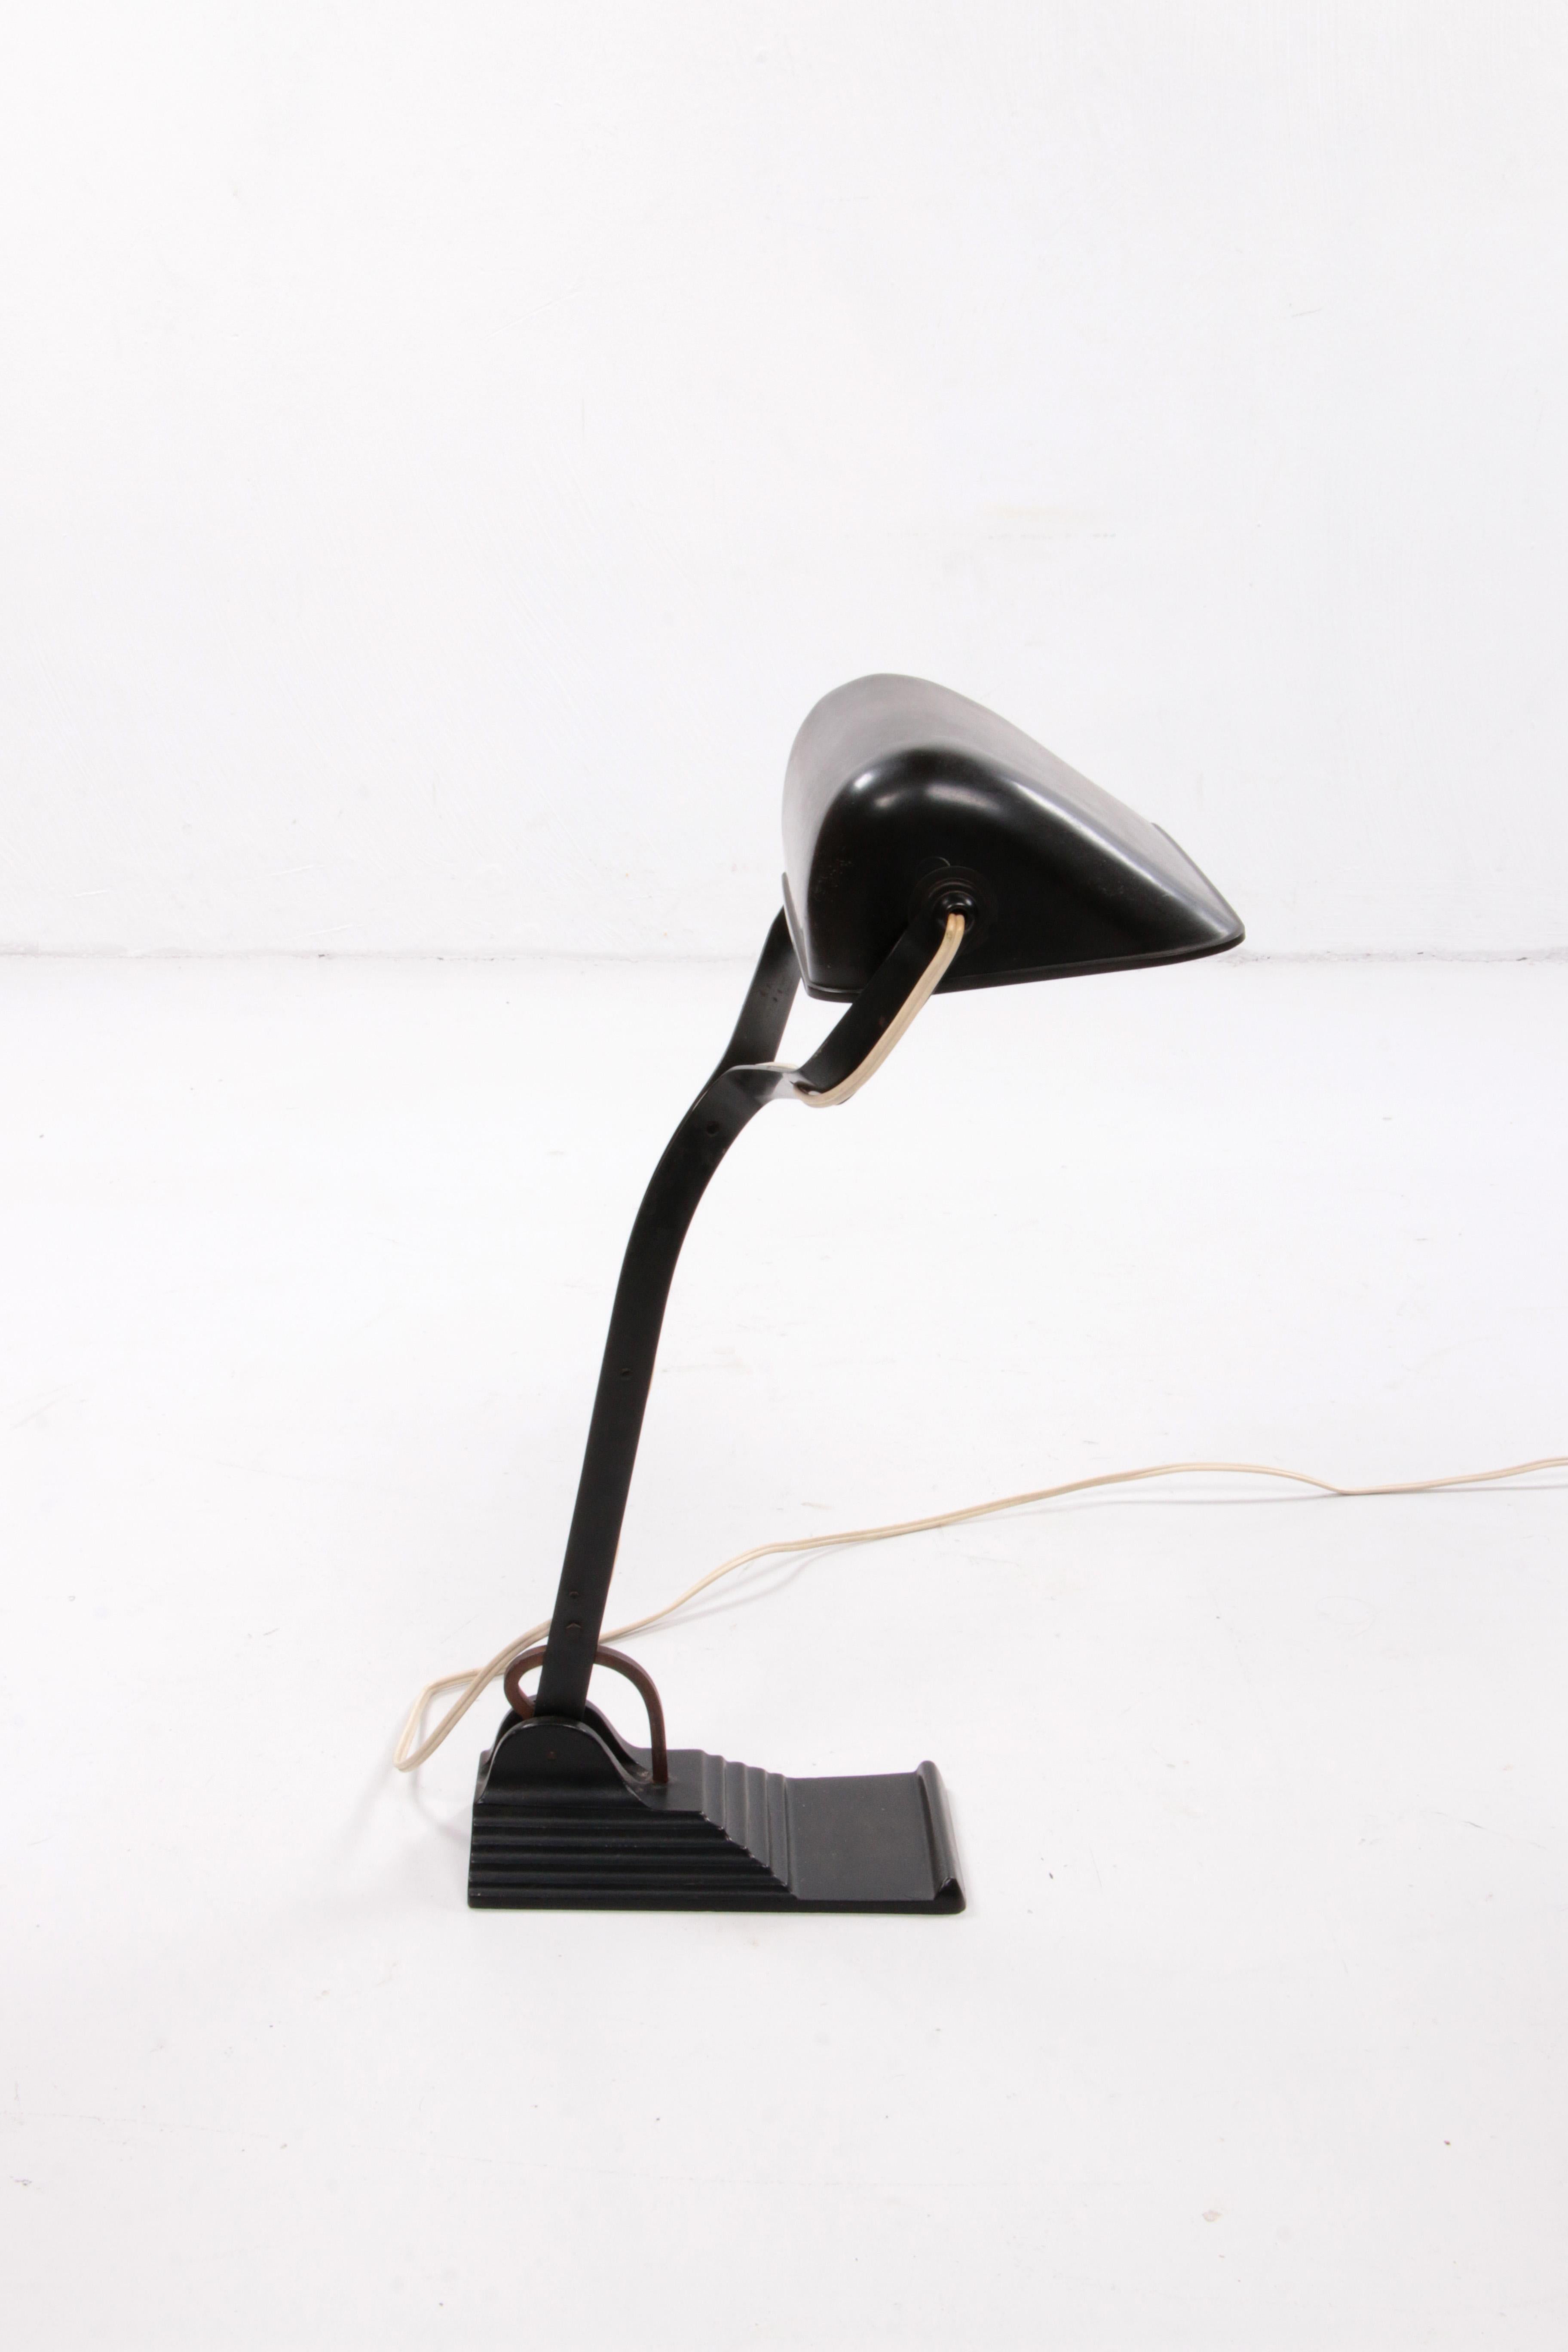 Art Deco desk lamp also called (notary lamp) made by Erpe Belgium. 2